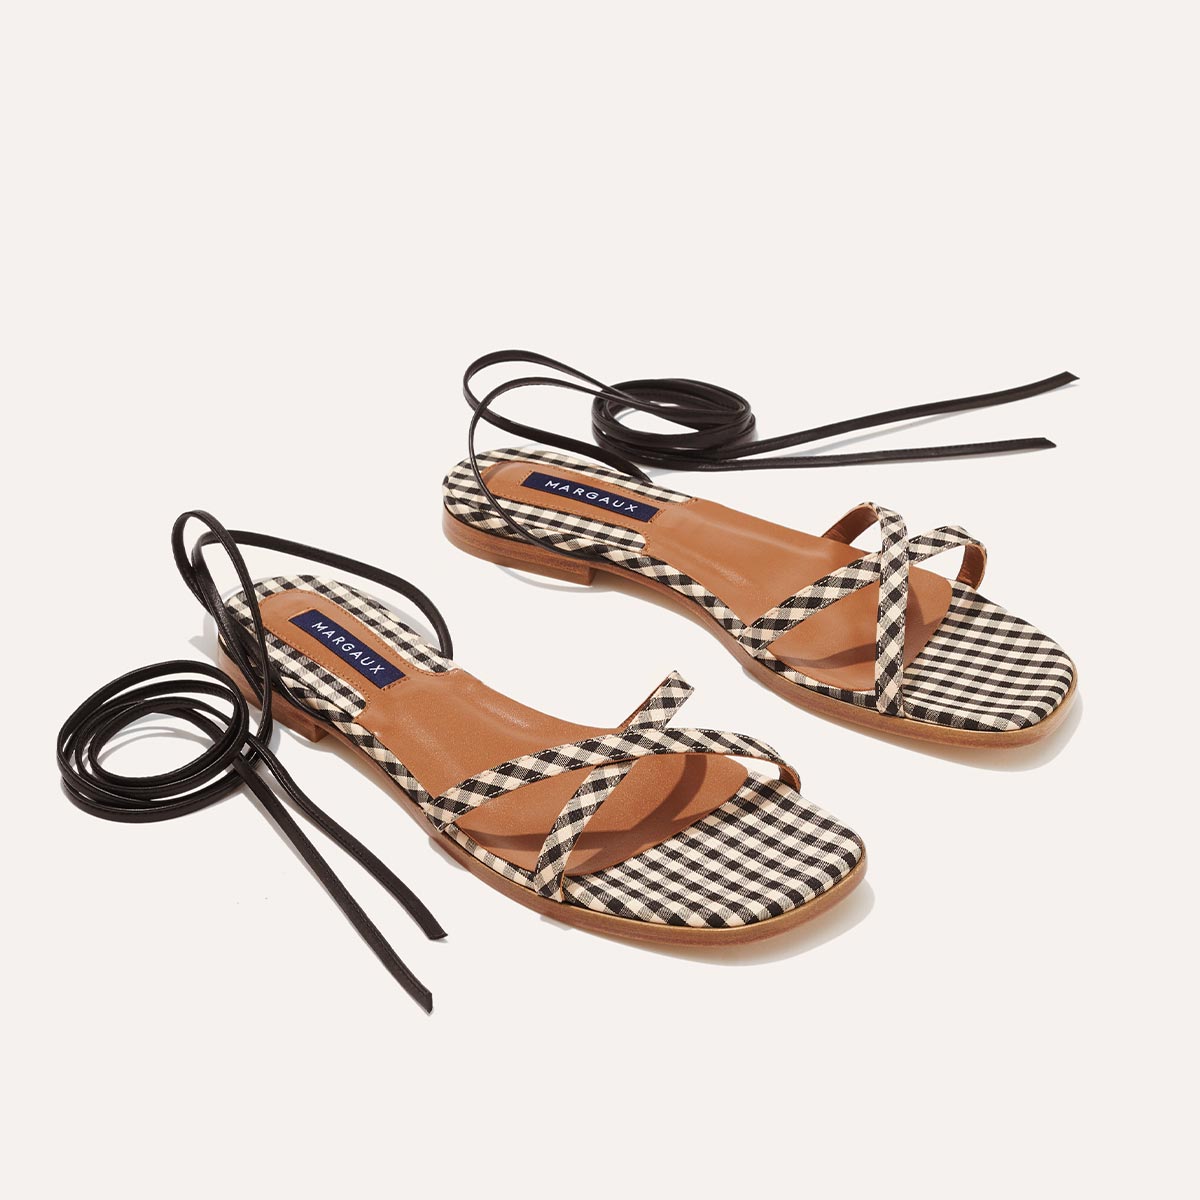 The Wrap Sandal - Tan and Black Gingham